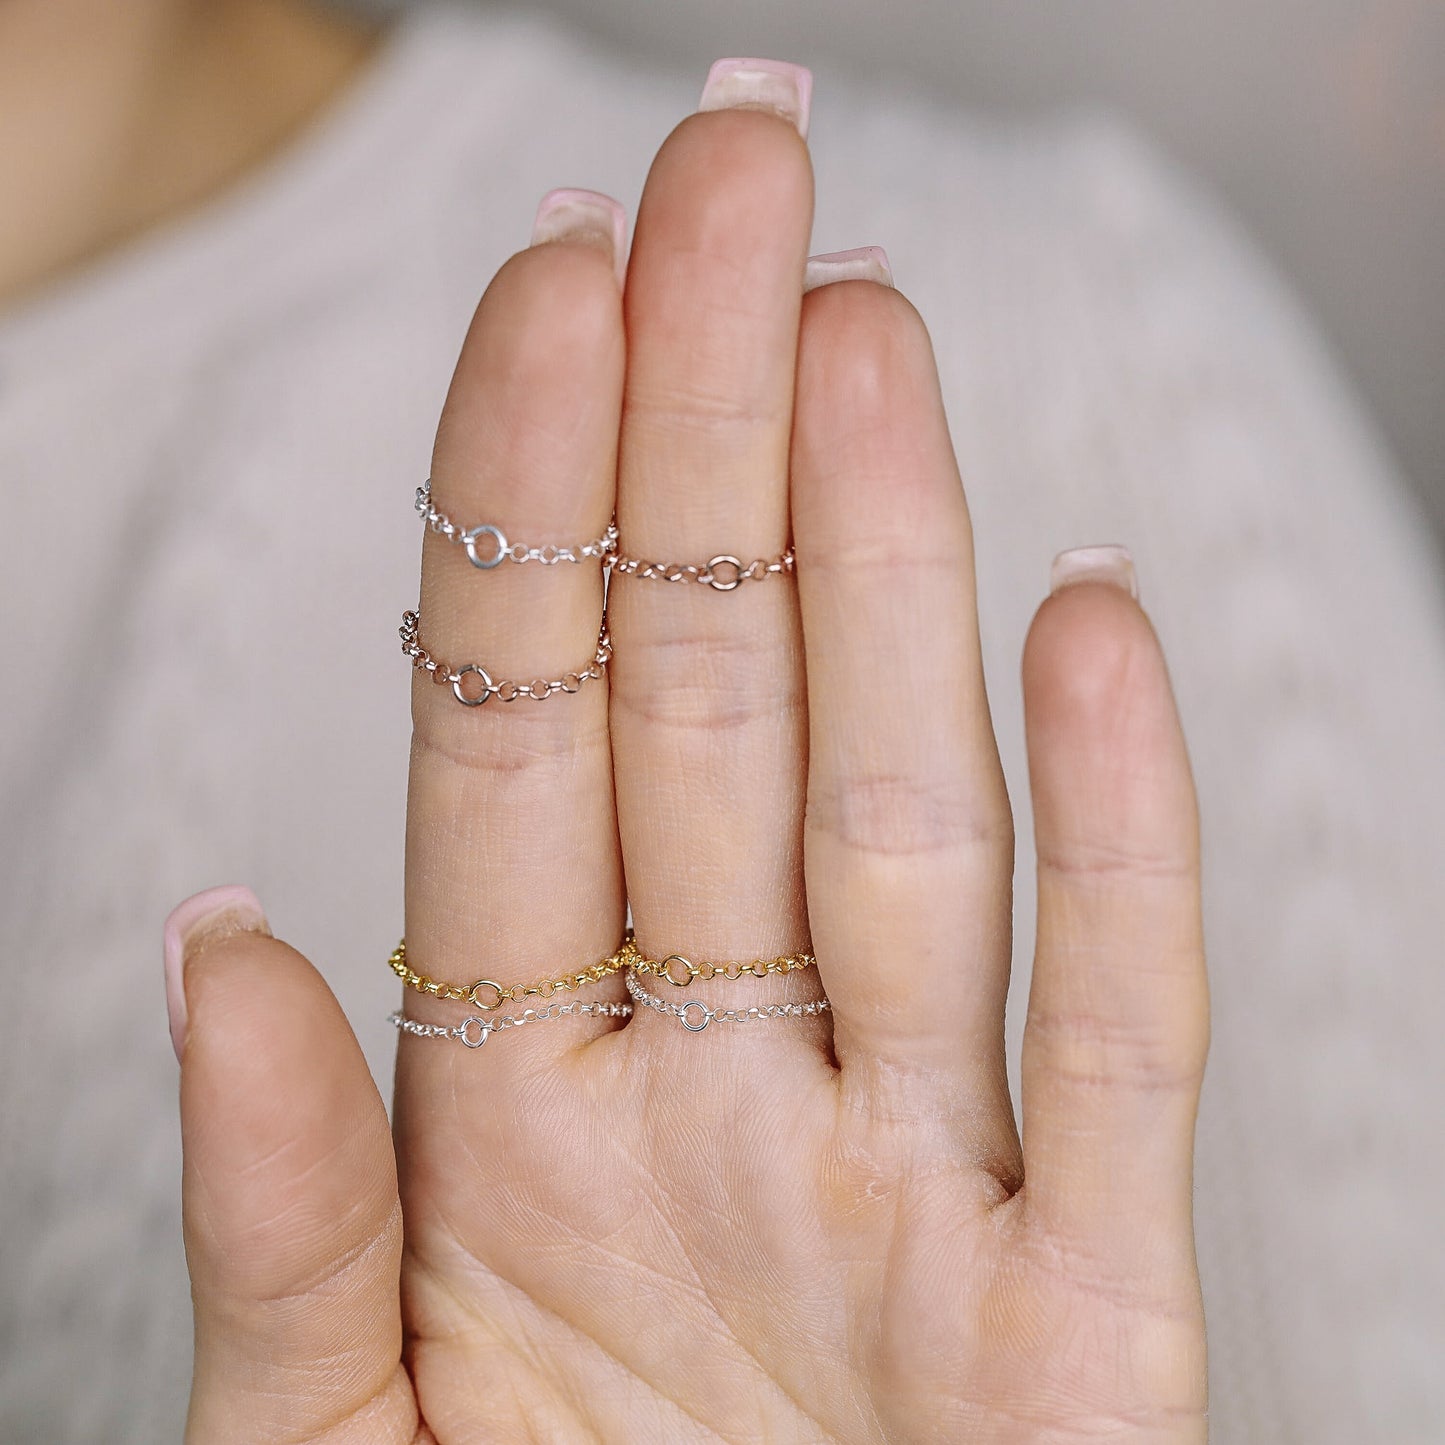 Gold Chain Ring, Simple Delicate Tiny Ring, Gold Stacking Ring, Dainty Chain Ring, Diamond Cut Chain Ring, Minimalist Ring, Thin Stack Ring